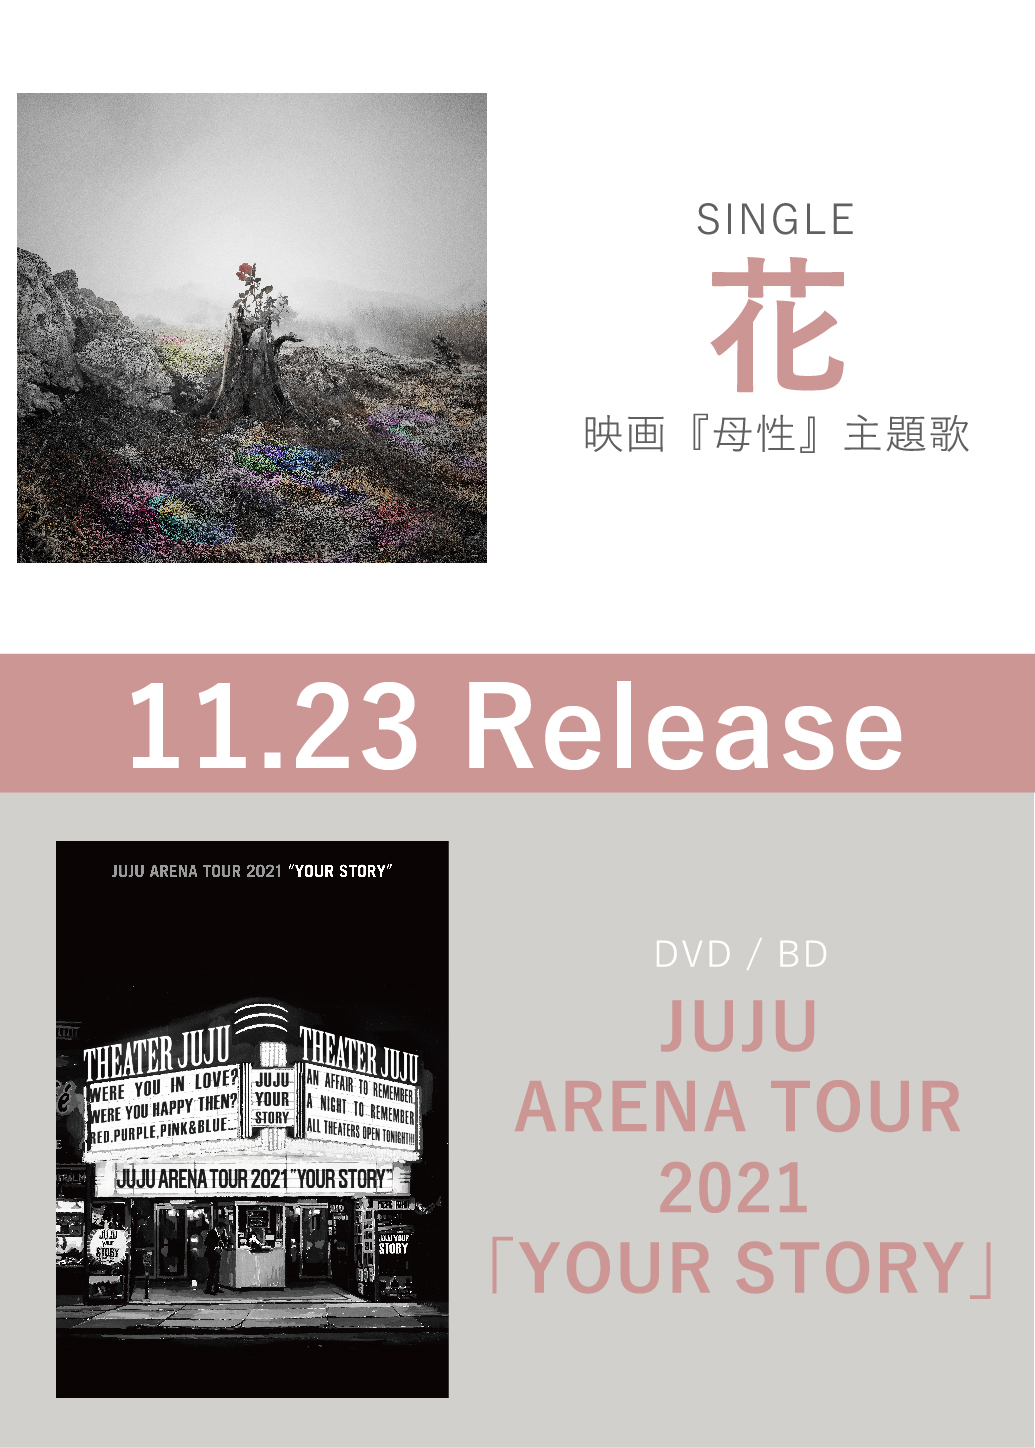 42nd Single「花」＆DVD / BD 『JUJU ARENA TOUR 2021「YOUR STORY」』11.23 Release